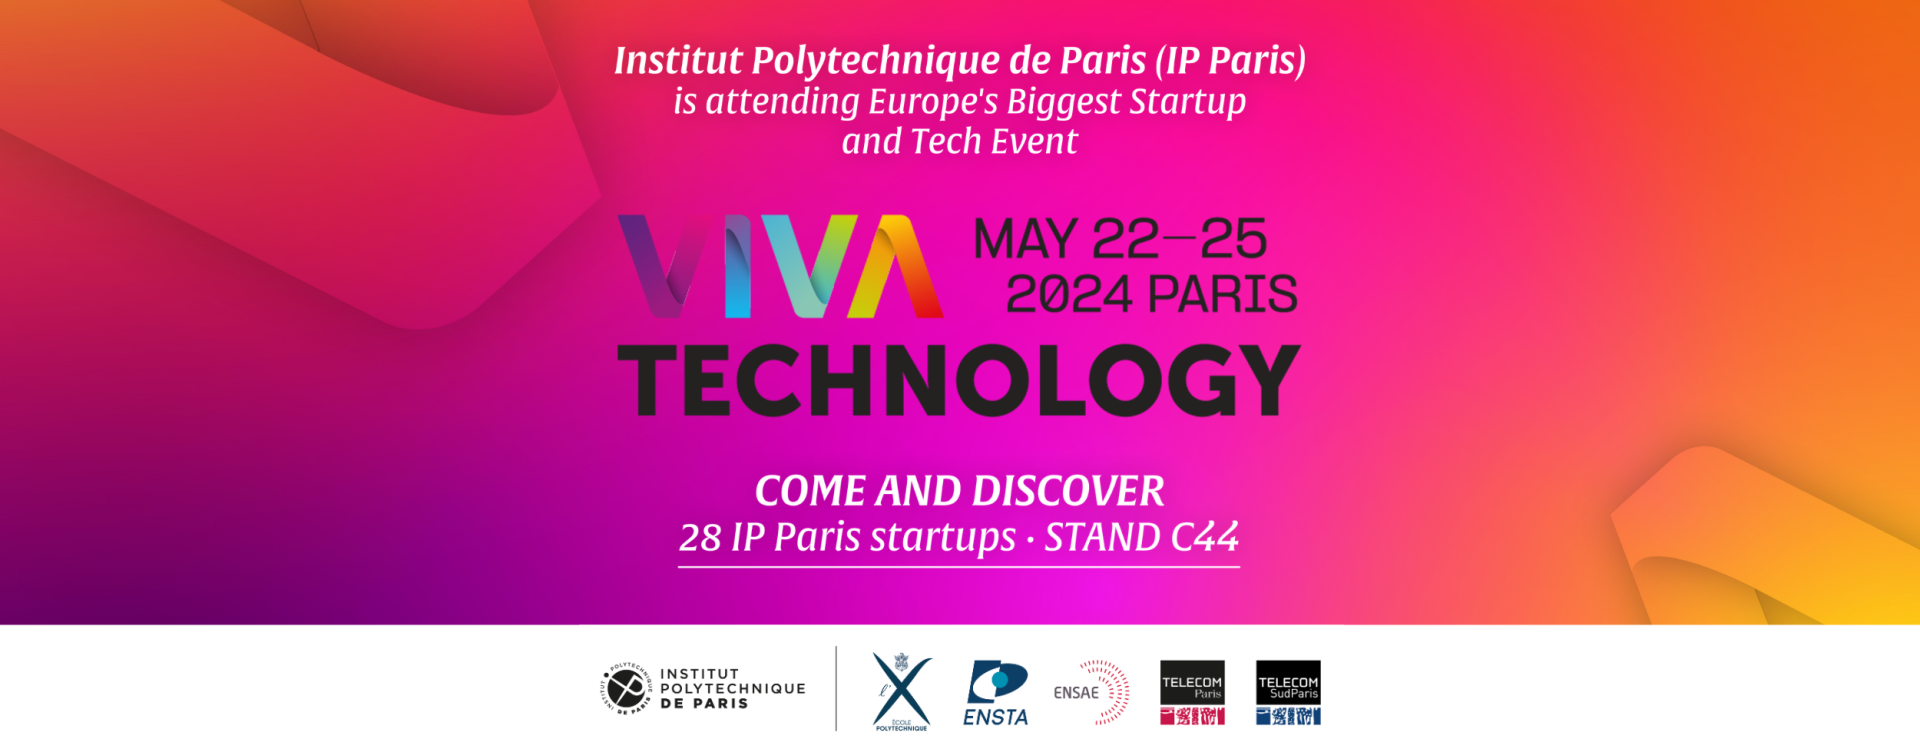 IP Paris Shows Up Strong at VivaTech